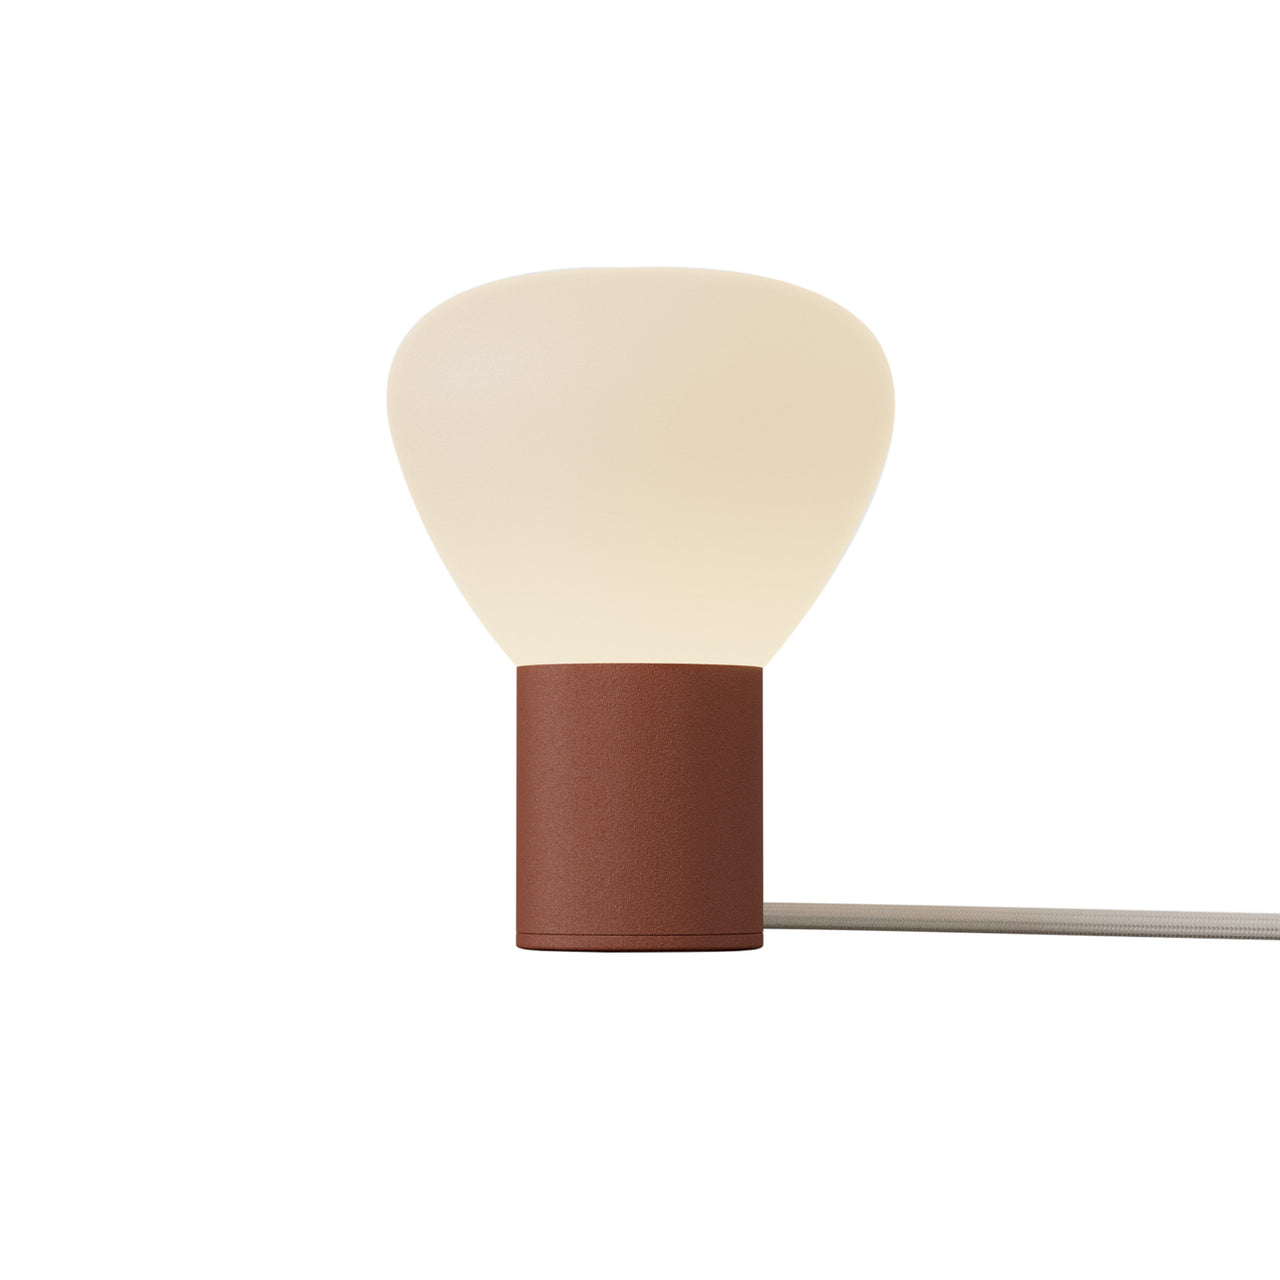 Parc 01 Table Lamp: Footswitch + Terracotta + Beige